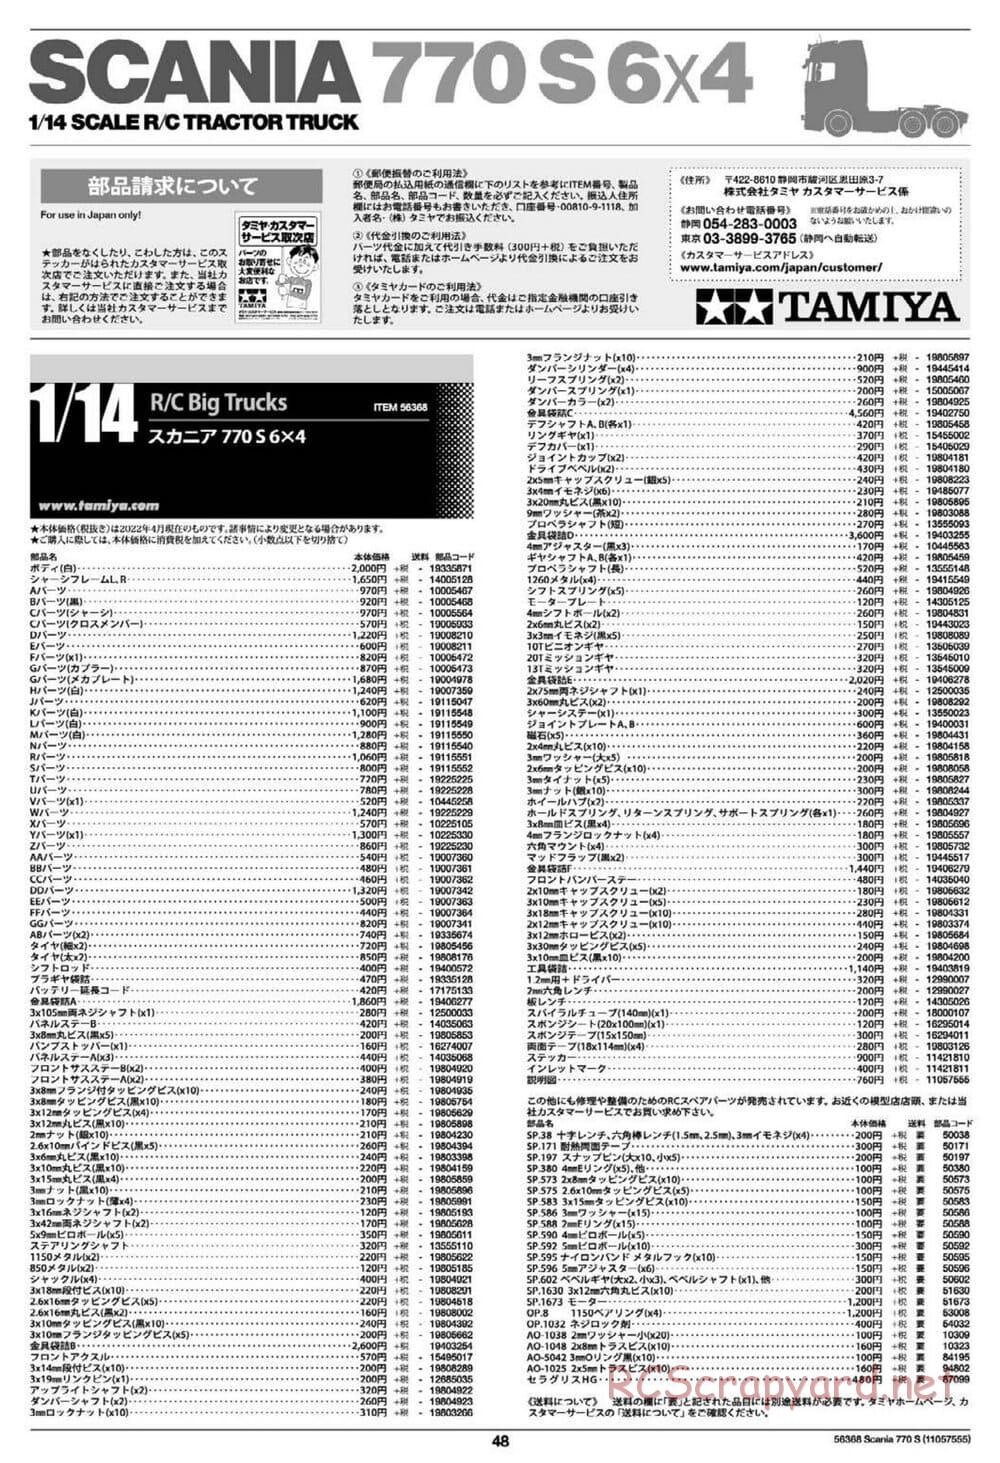 Tamiya - Scania 770S 6x4 Tractor Truck Chassis - Manual - Page 48